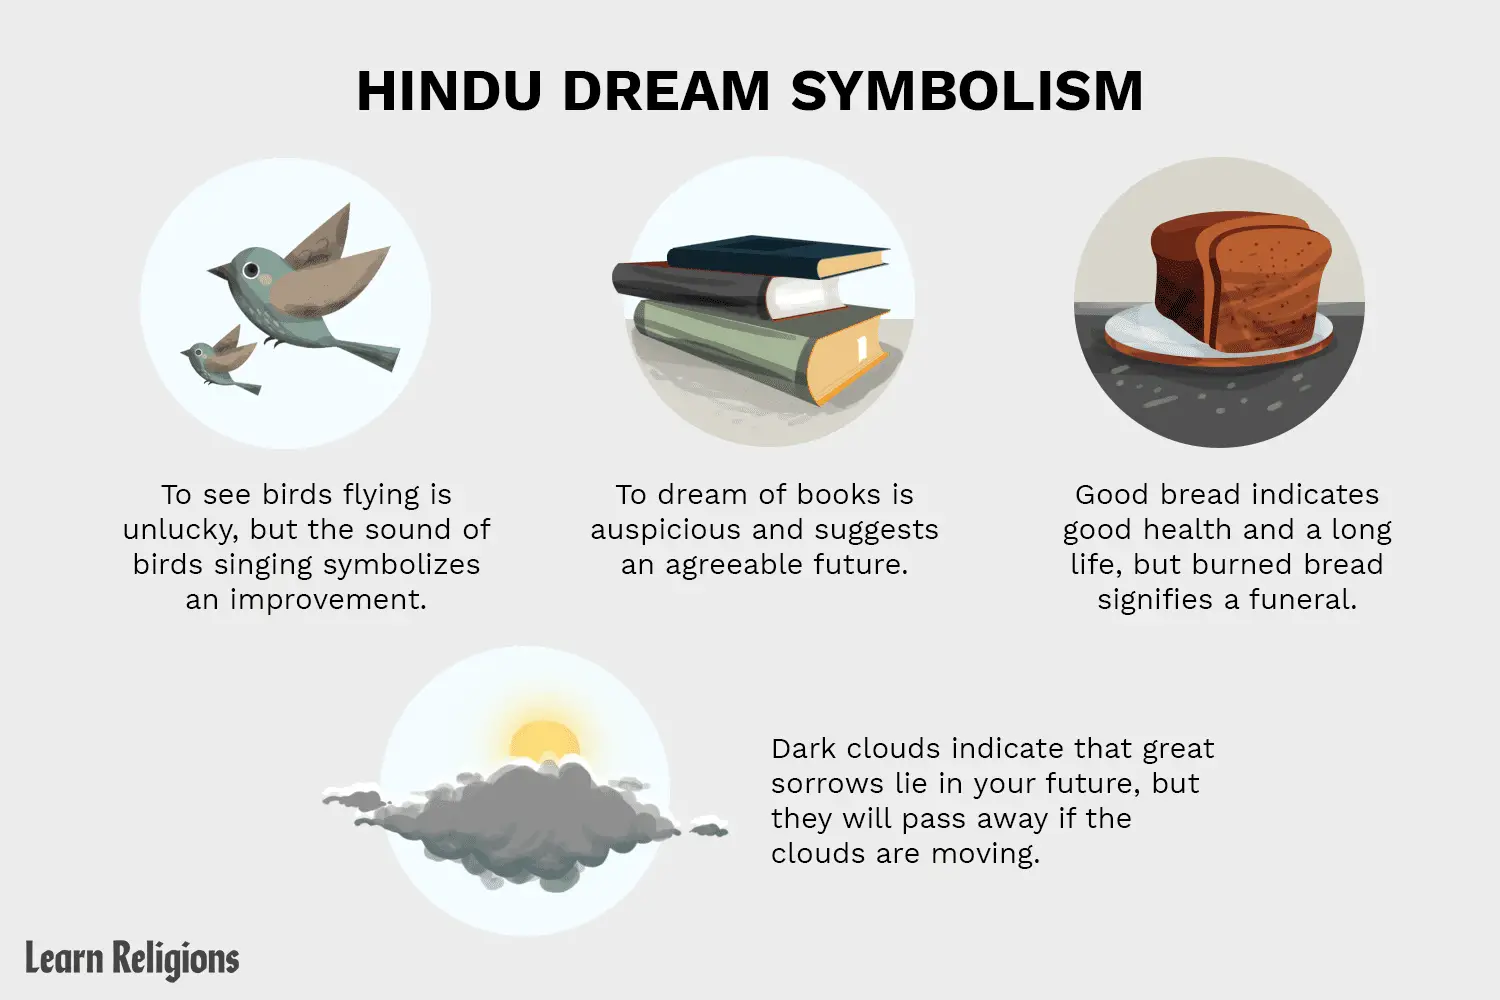 Related Symbolism To The Dream